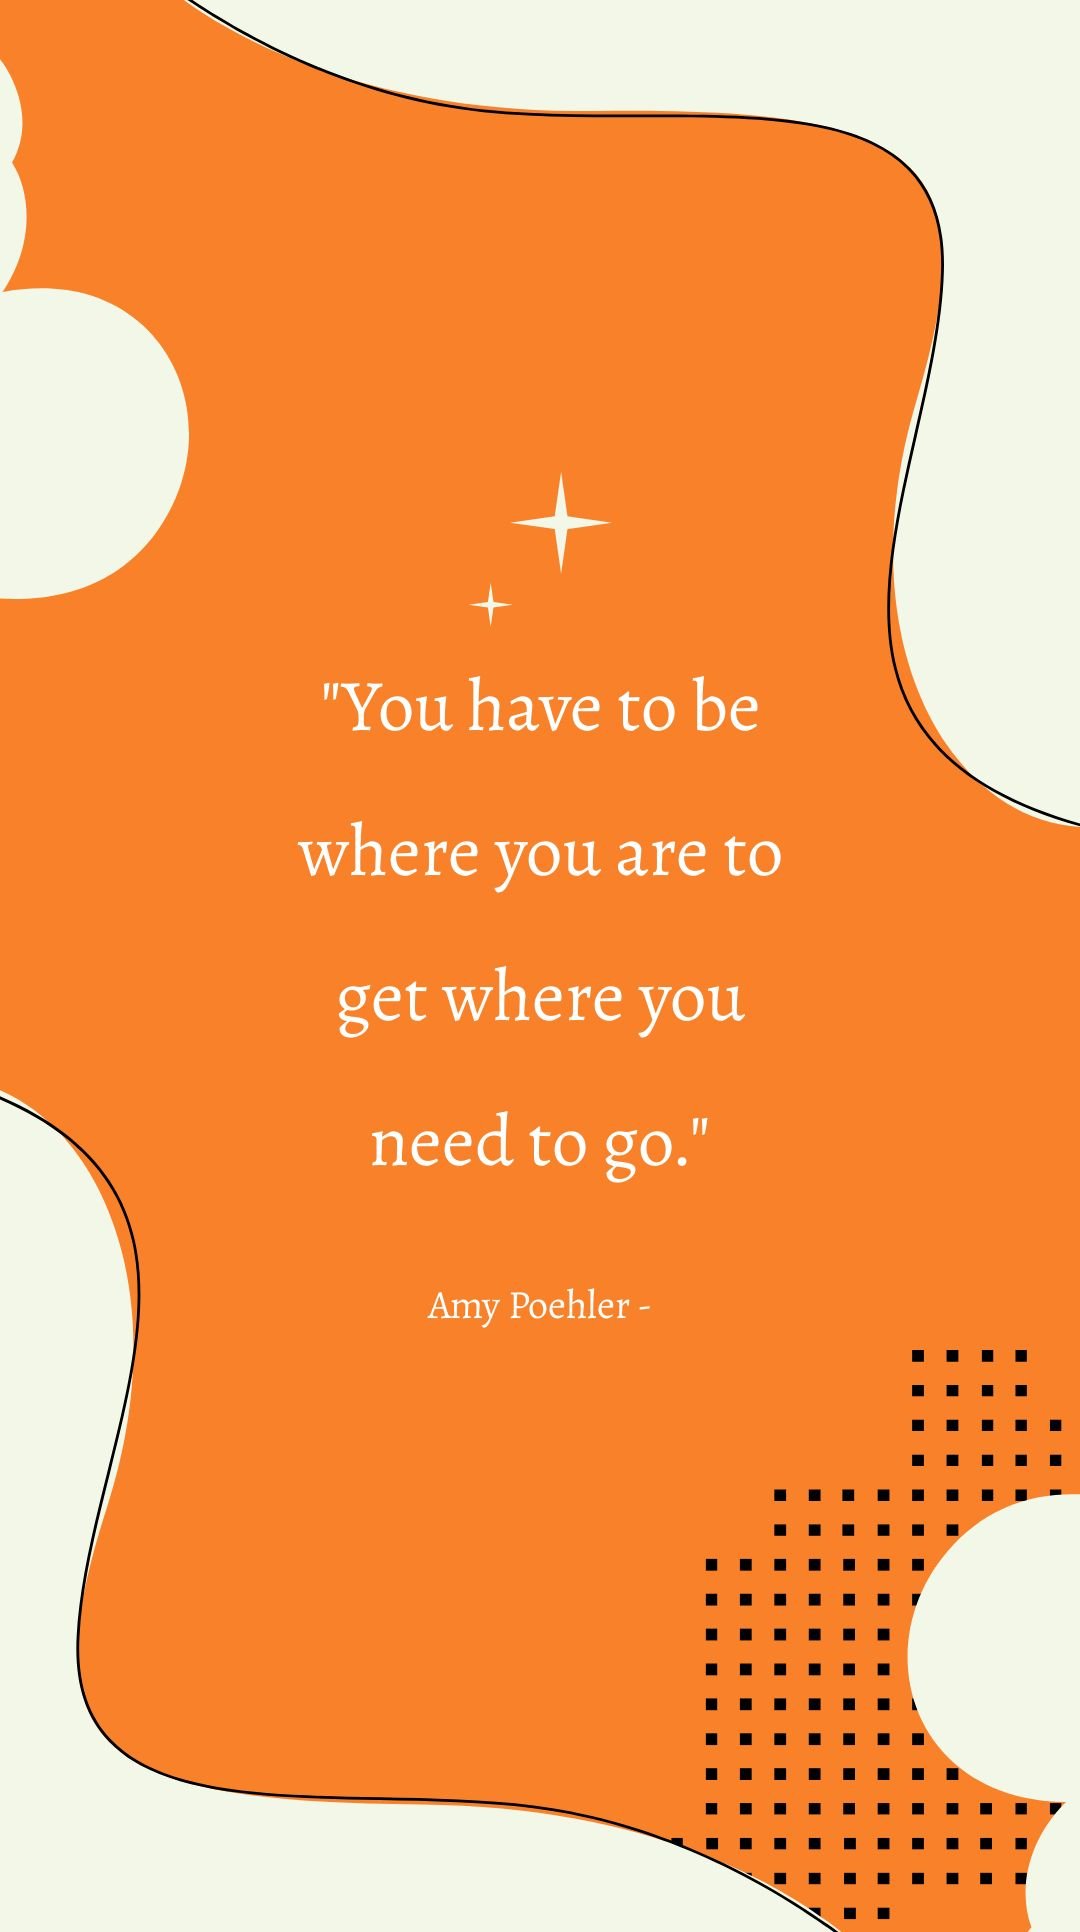 Amy Poehler - You have to be where you are to get where you need to go.